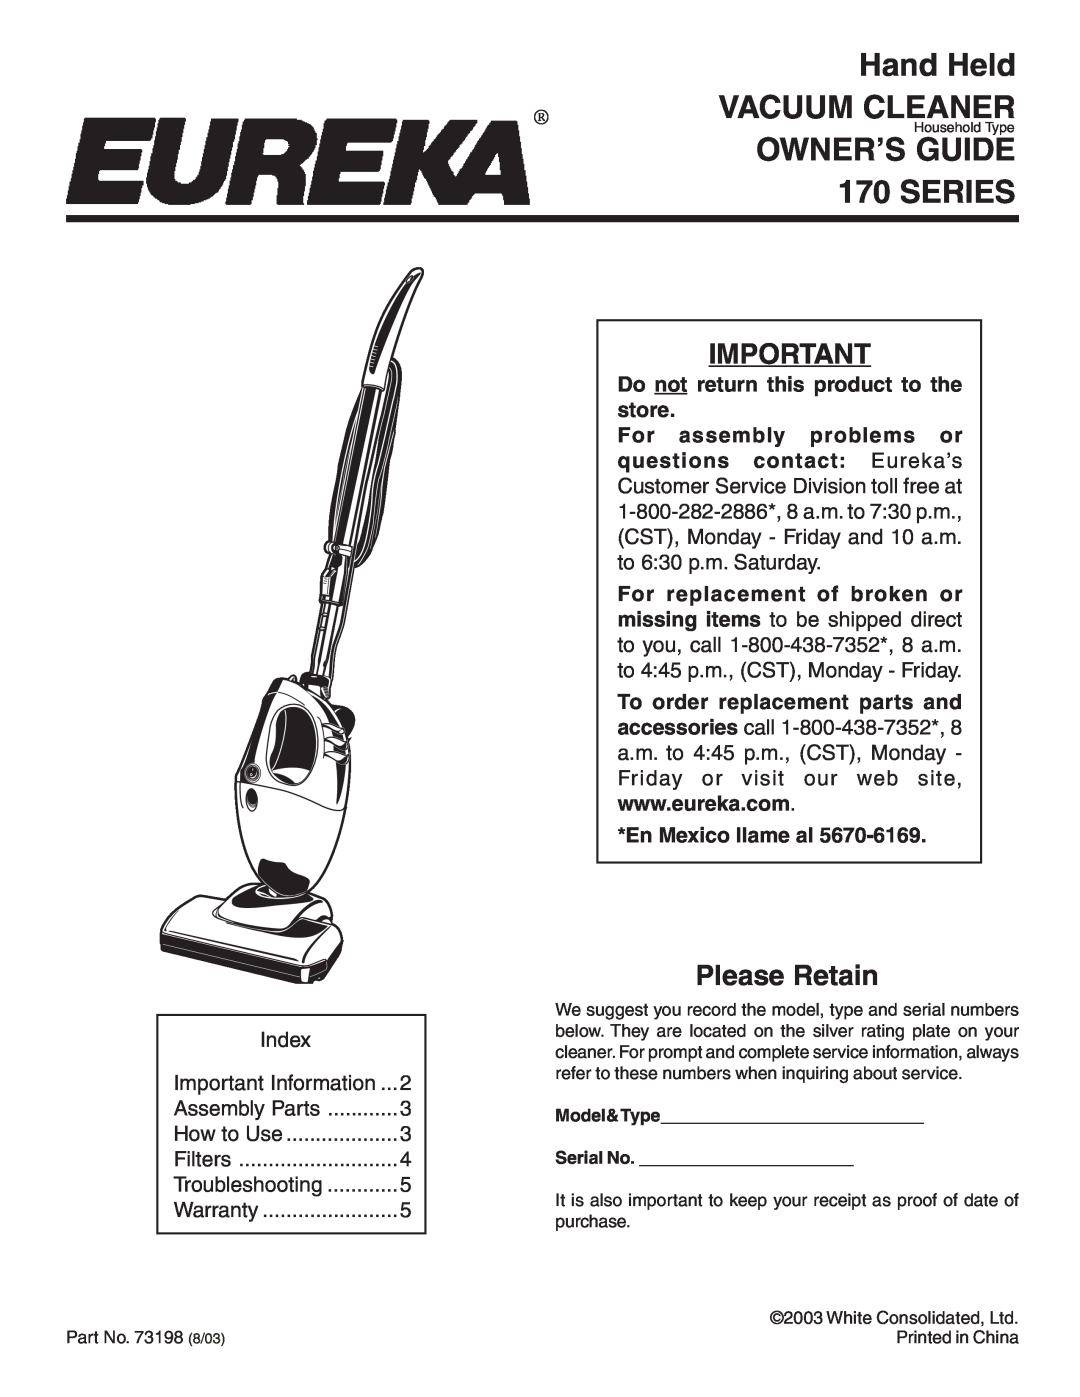 Eureka 170 SERIES warranty Do not return this product to the store, En Mexico llame al, Hand Held, Vacuum Cleaner, Series 